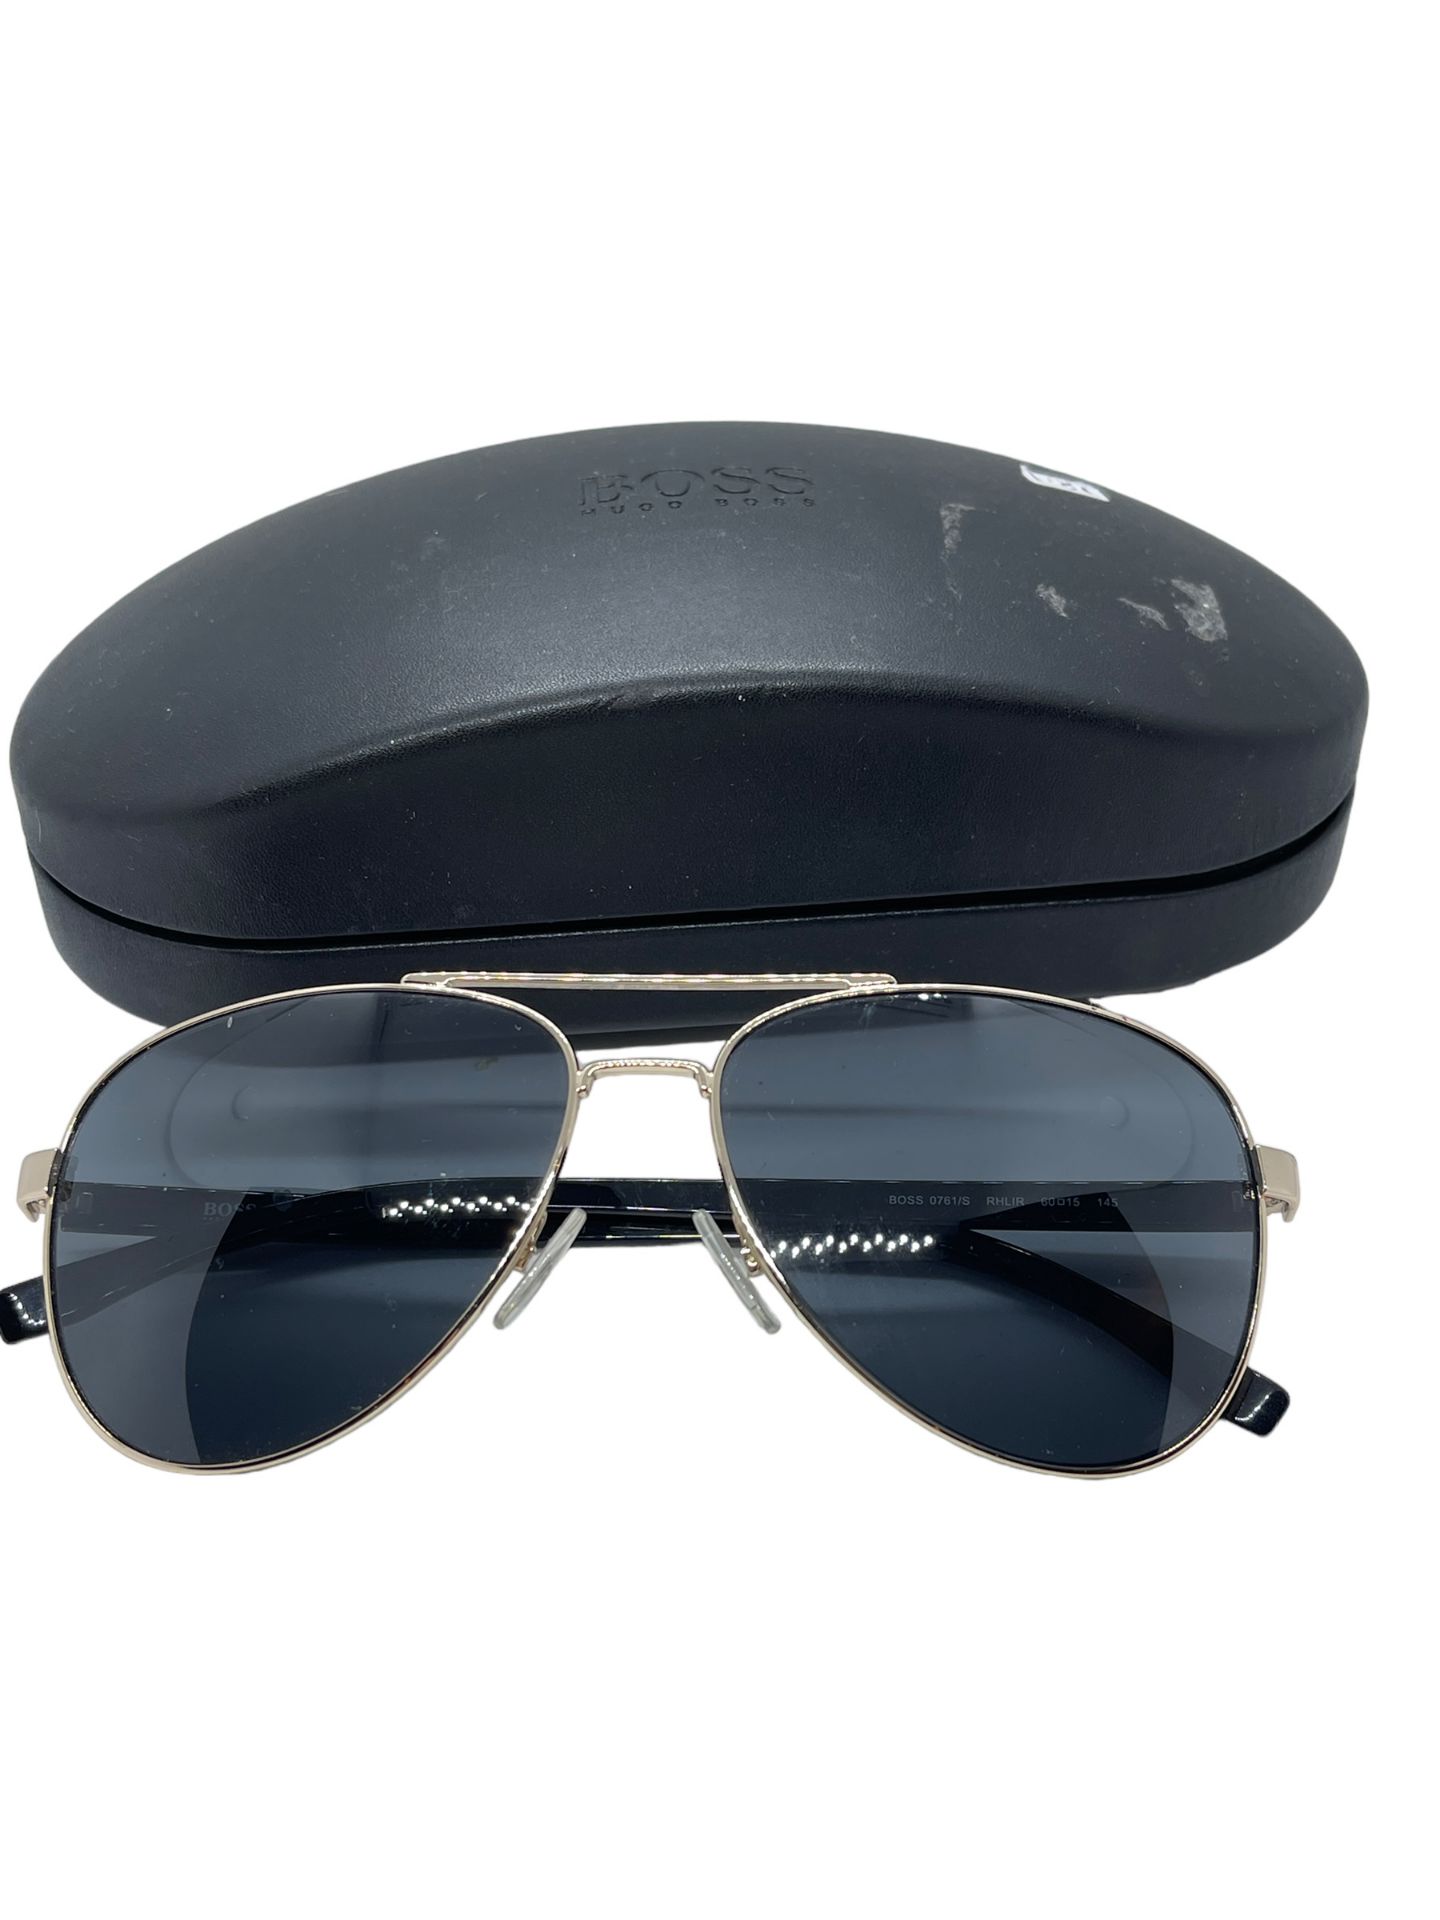 Hugo Boss Sunglasses gold plated aviators with case surplus stock xdemo - Image 2 of 6